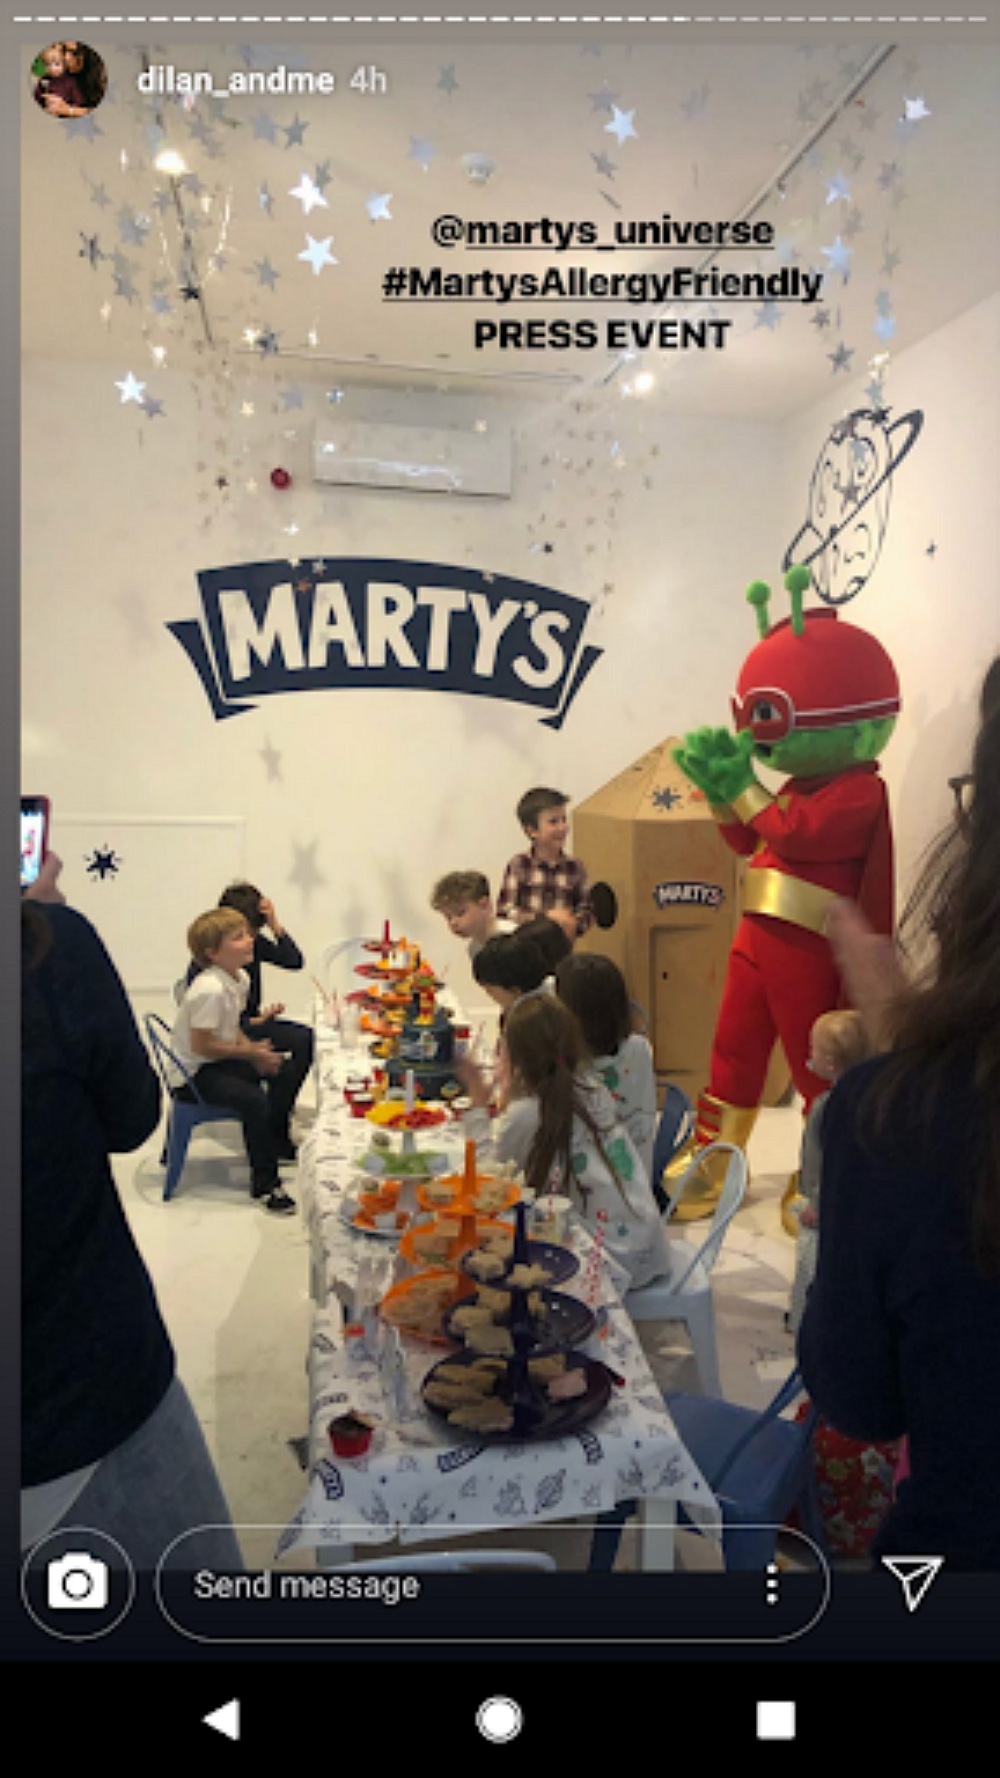 Martys event